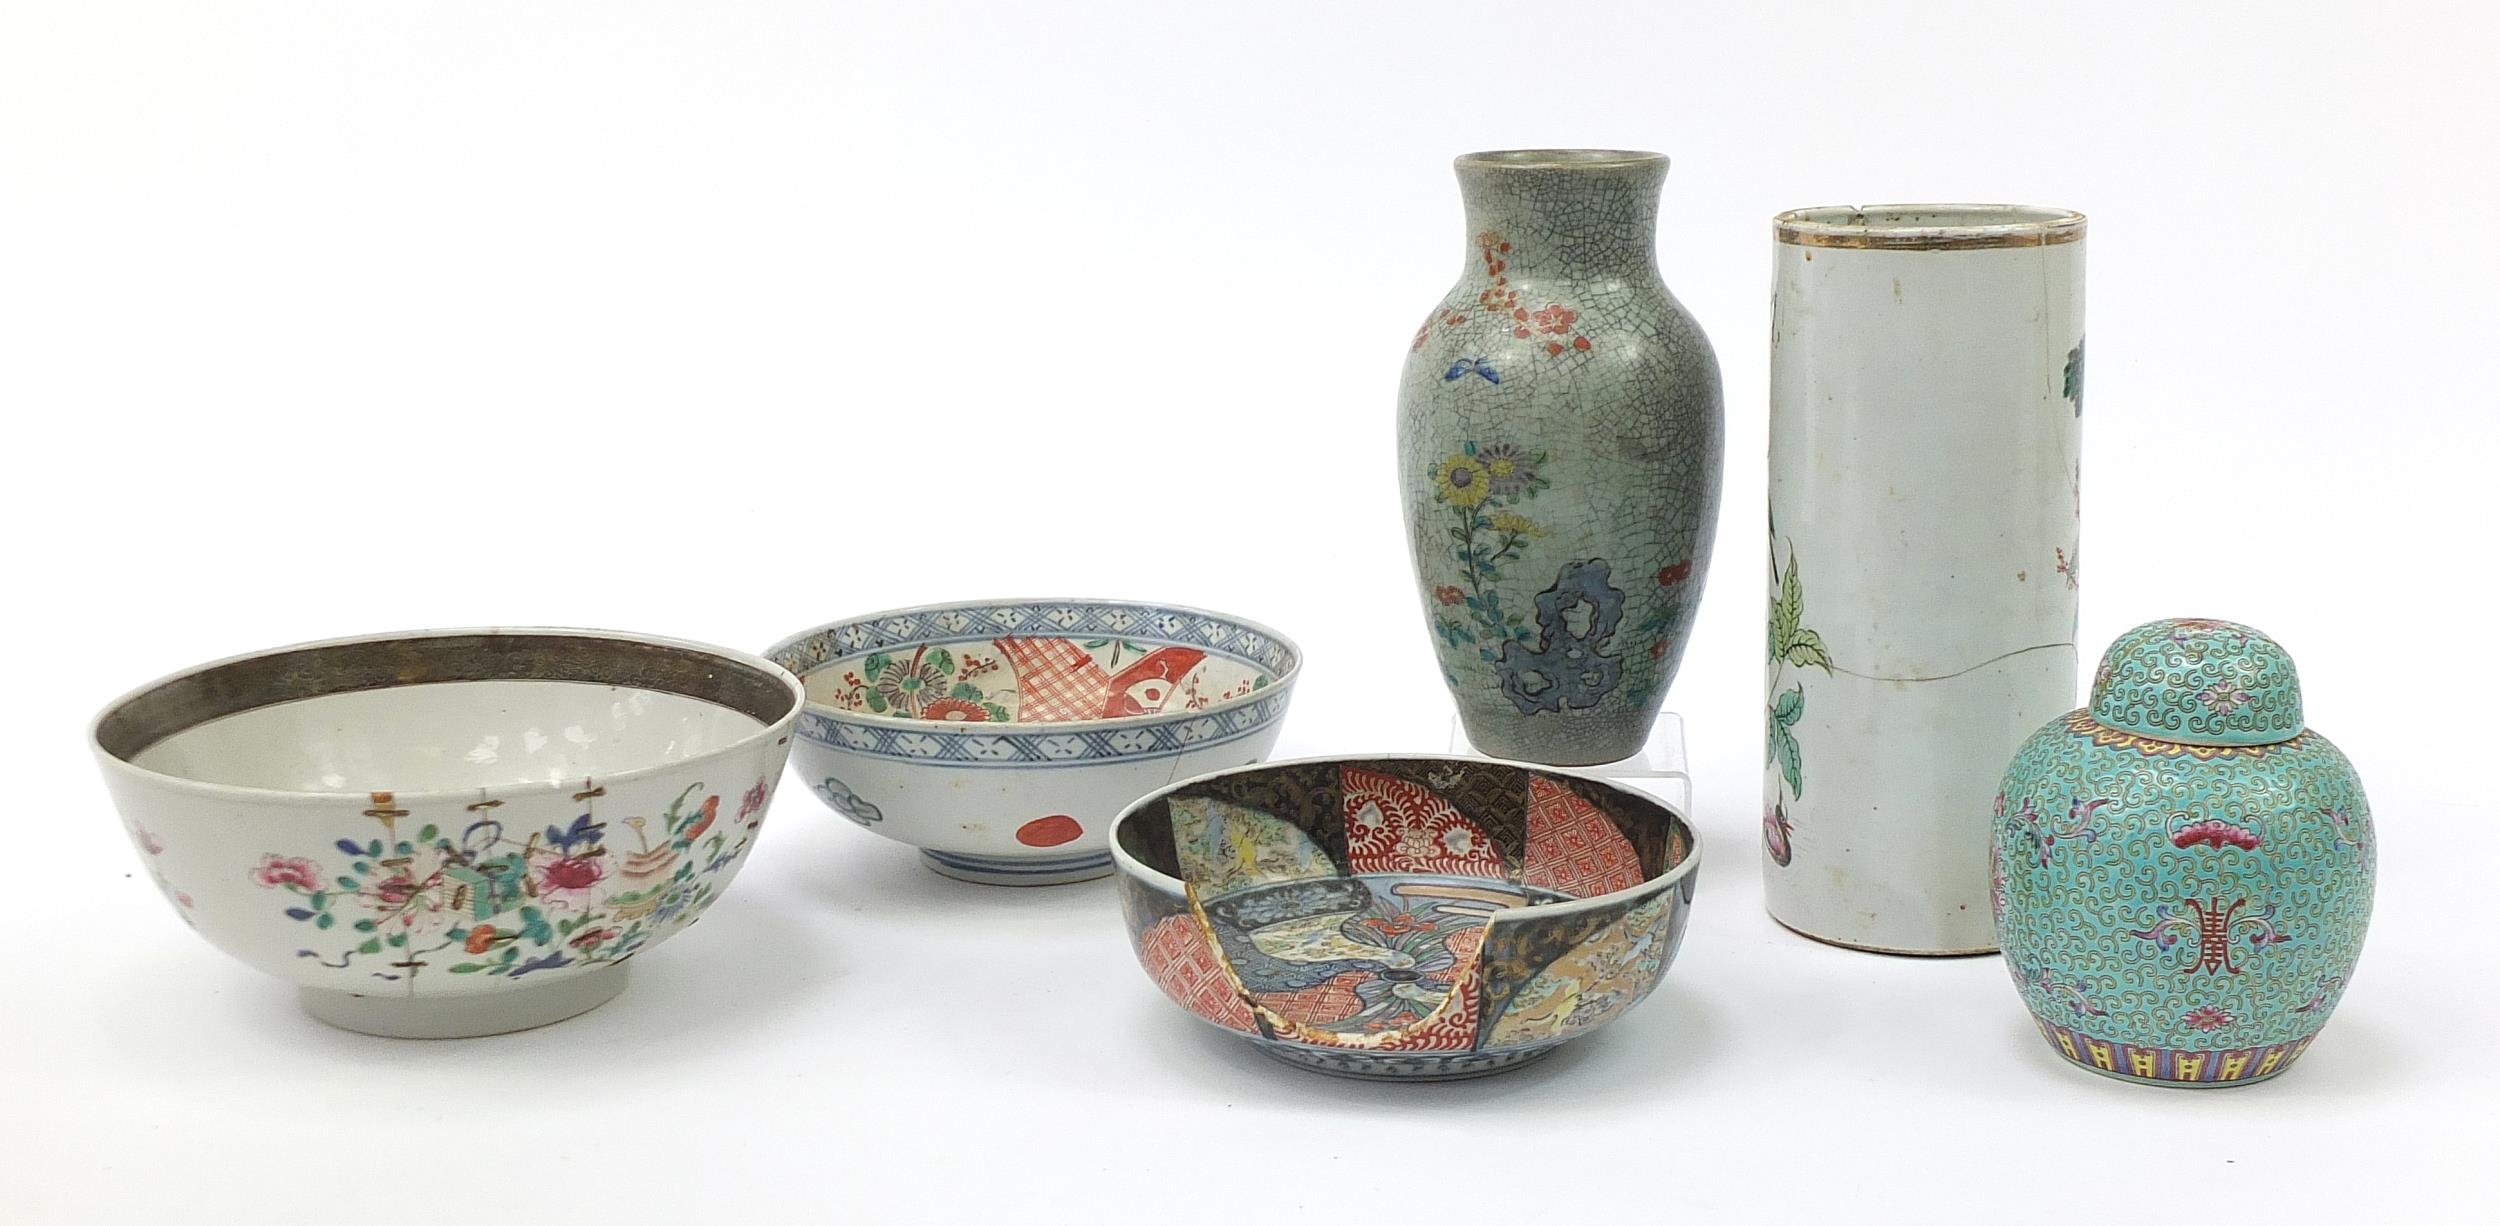 Chinese and Japanese porcelain including a cylindrical vase hand painted with a phoenix, Imari - Image 5 of 11